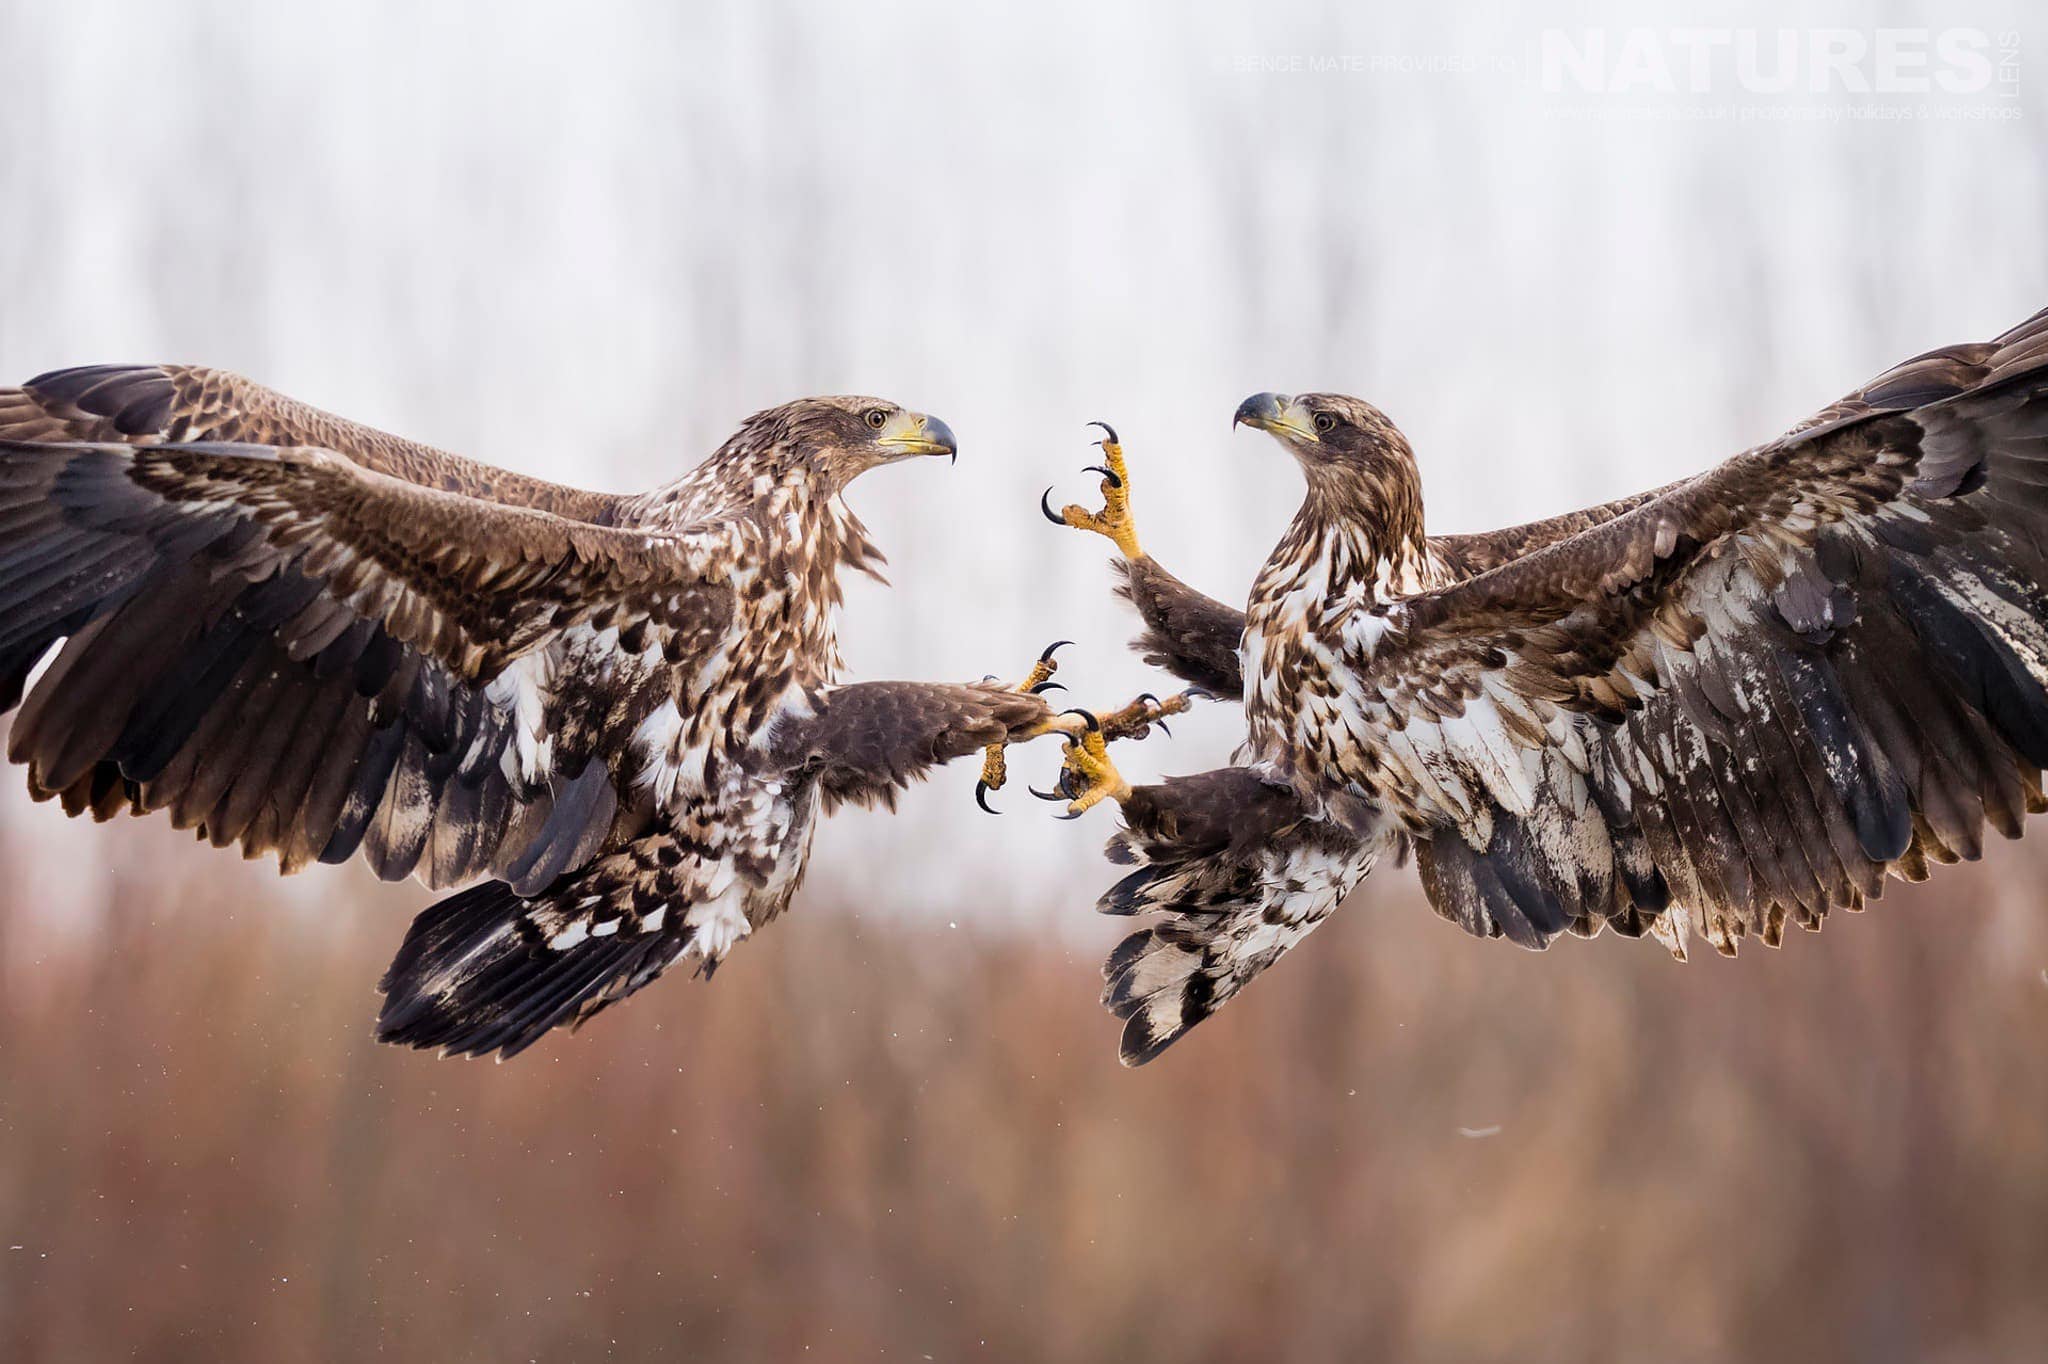 Fighting Eagles at Bence Mátés Photography Hides during the Hungarian Winter